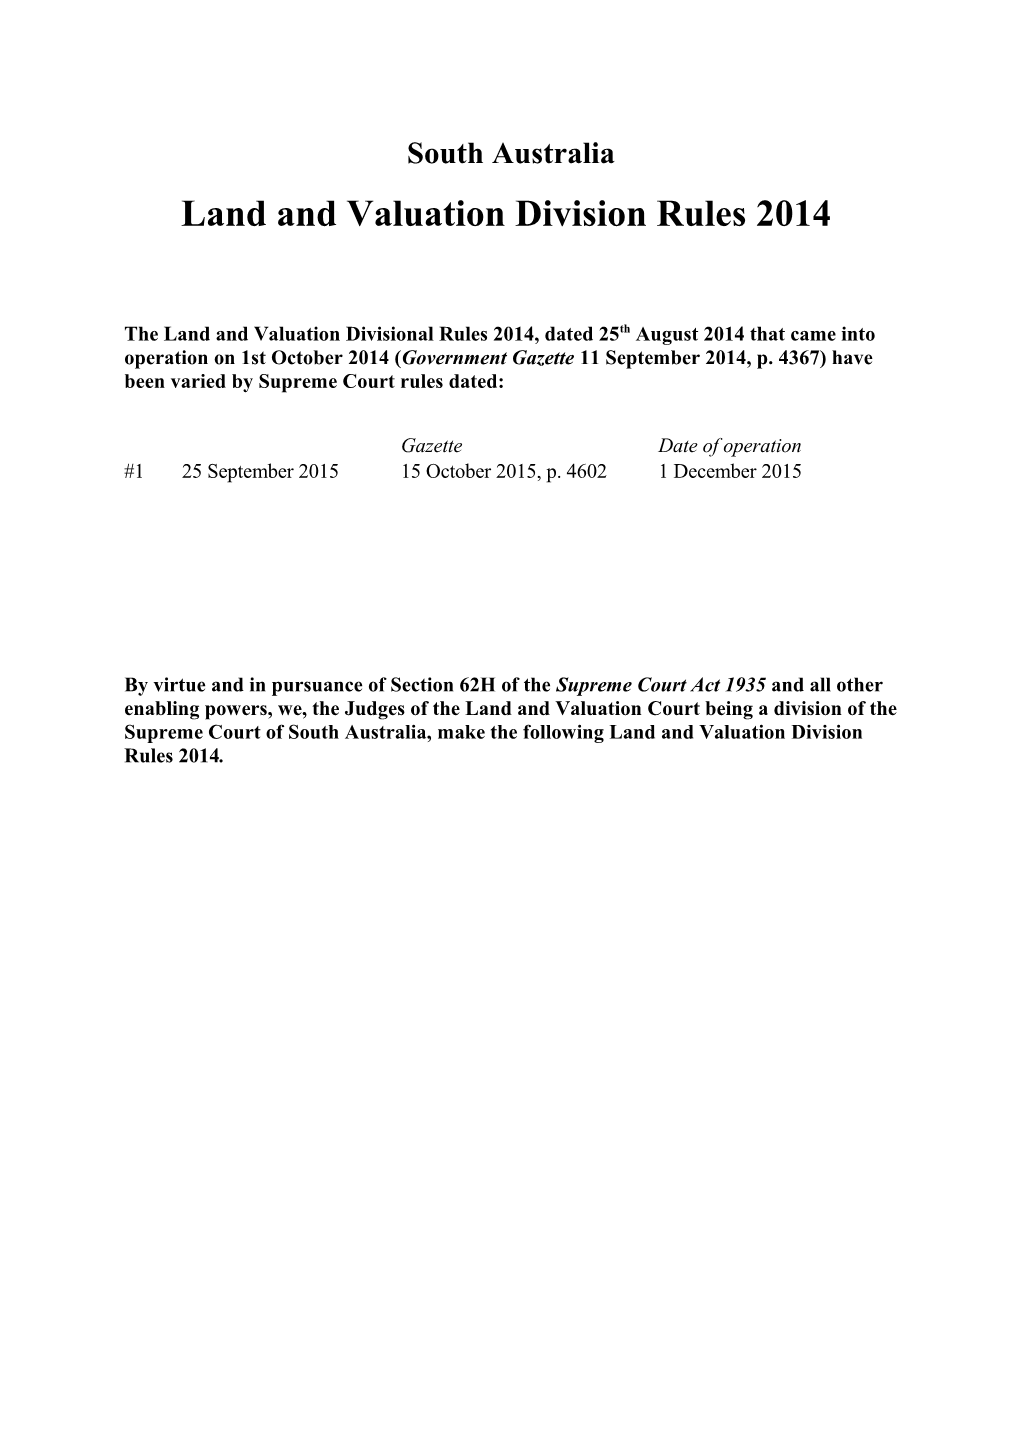 Land and Valuation Division Rules 2014